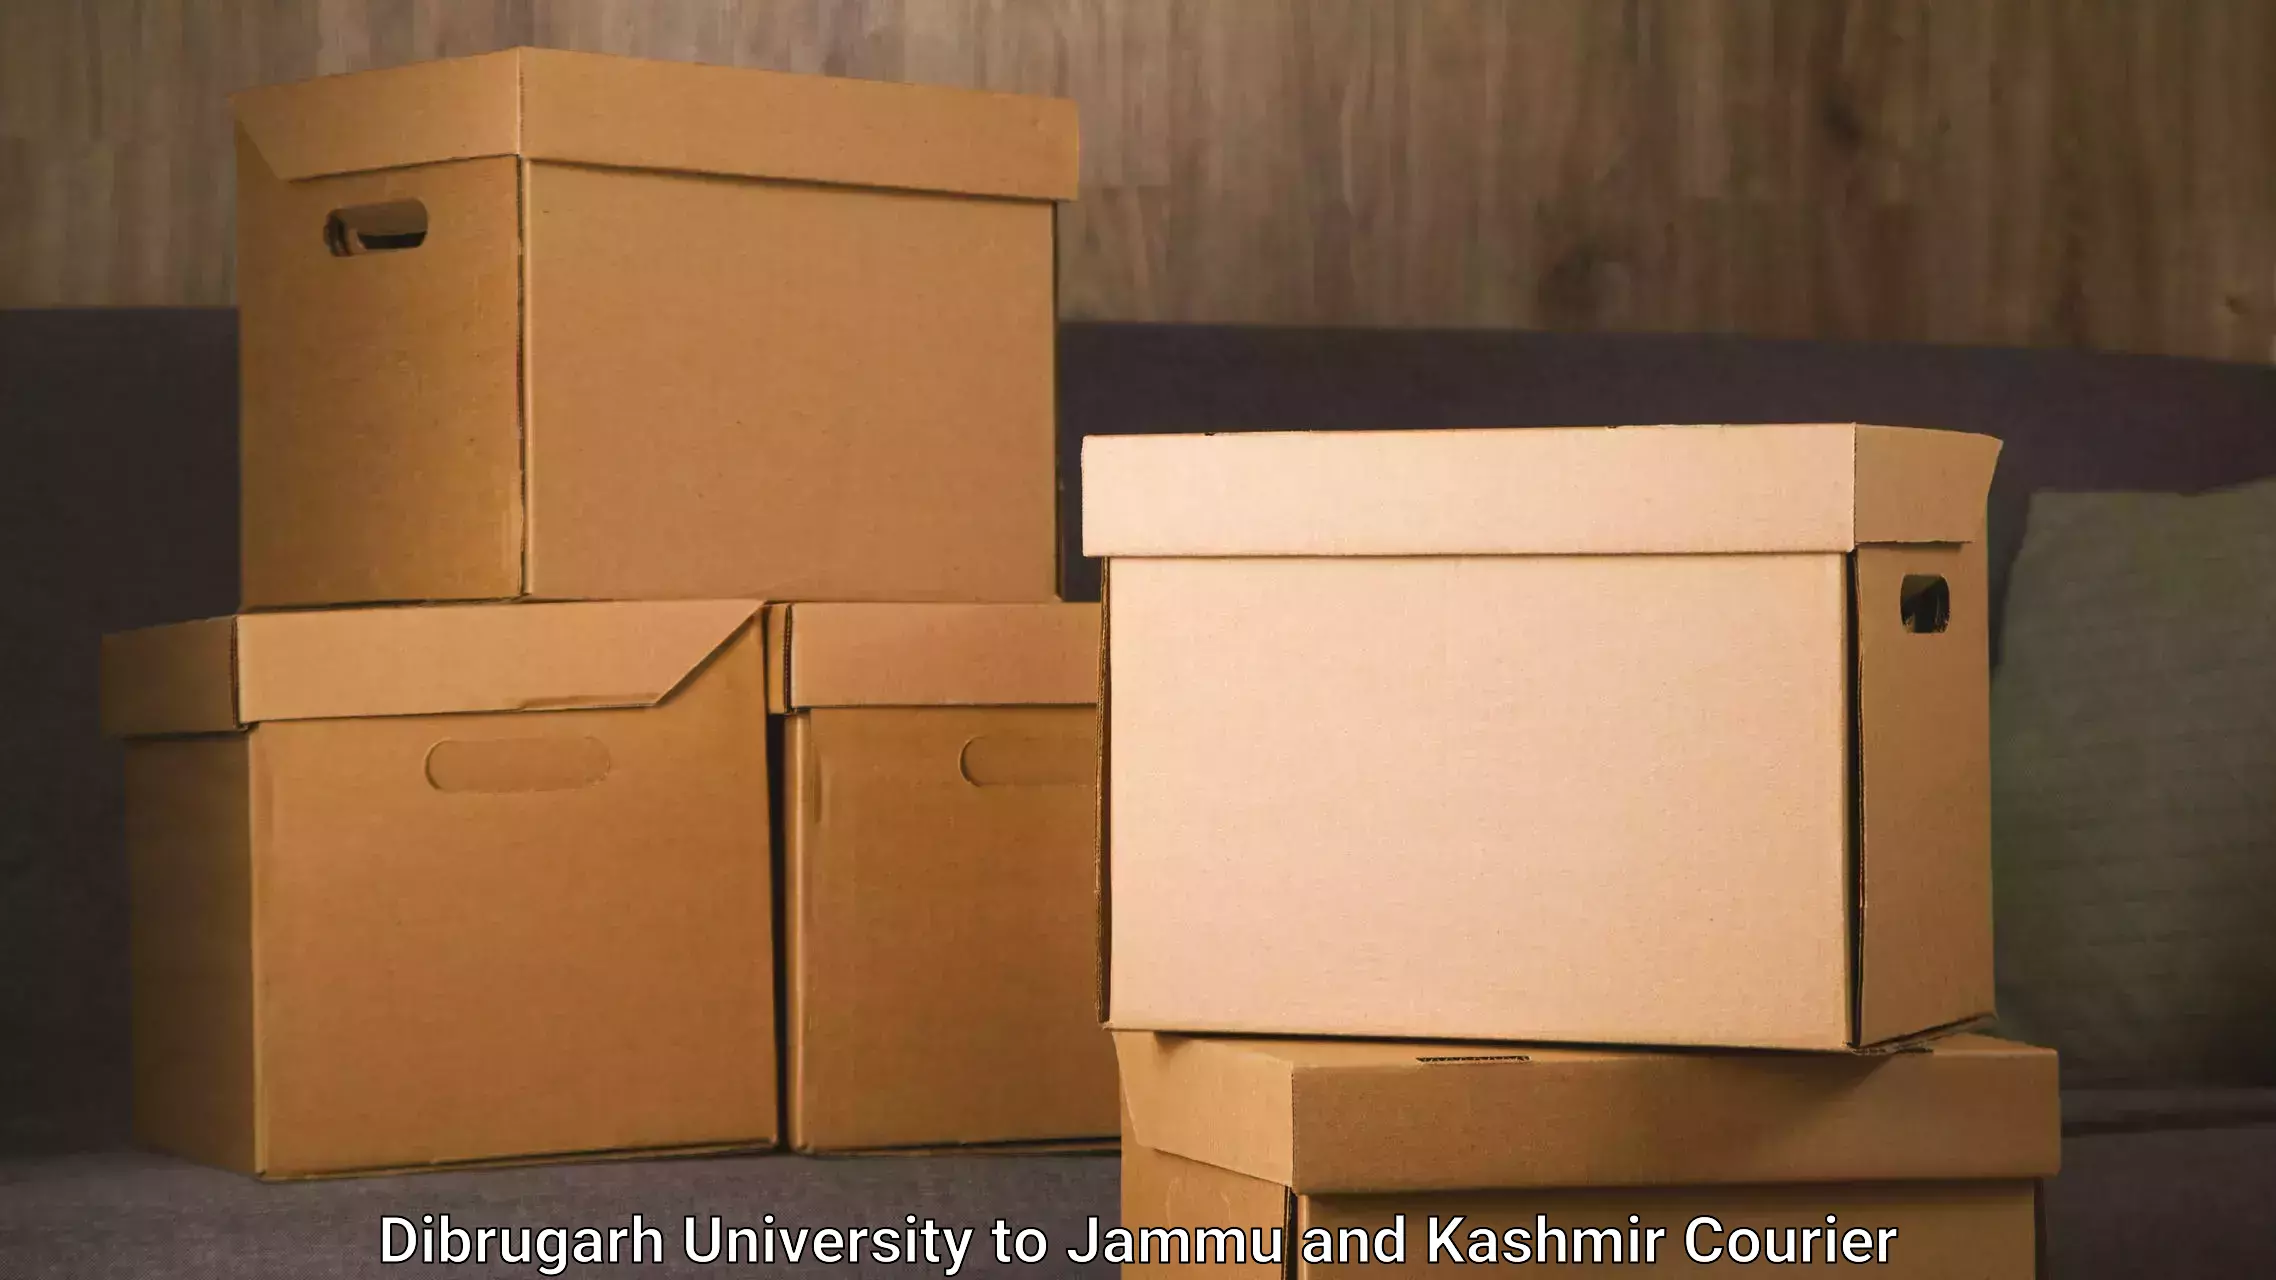 Residential courier service Dibrugarh University to Jammu and Kashmir